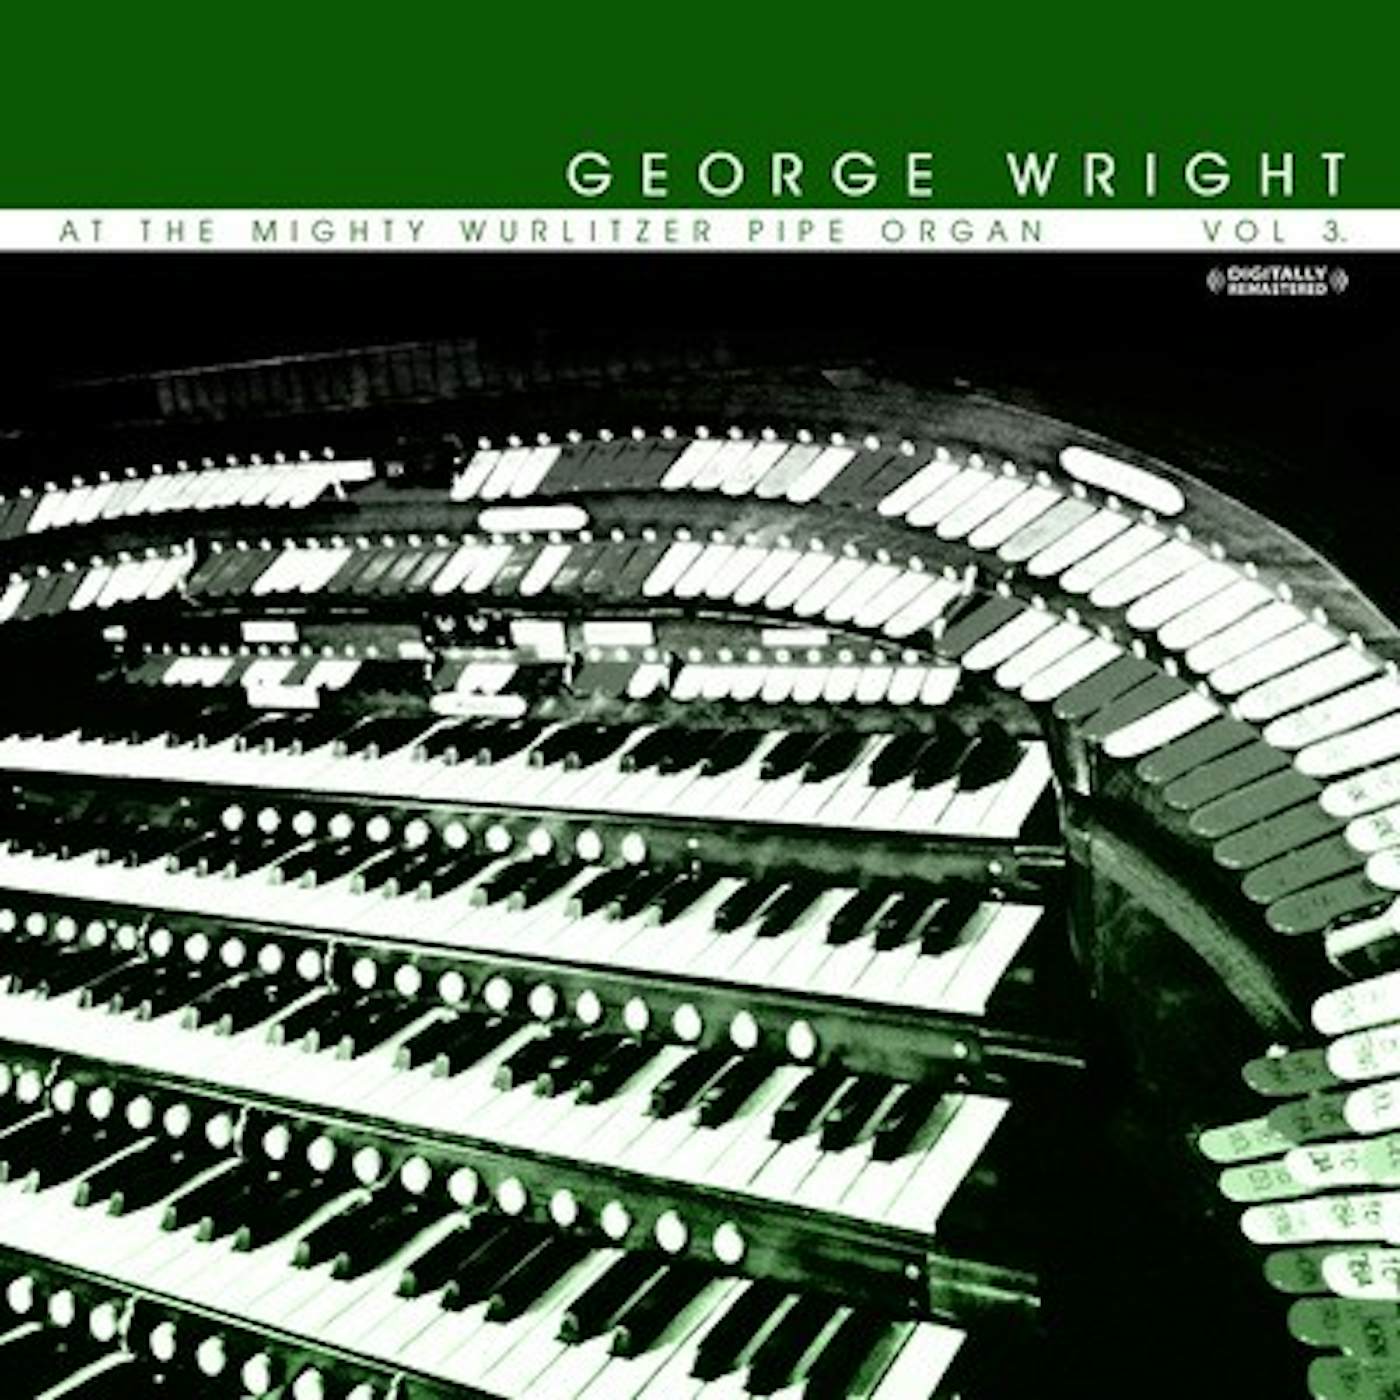 George Wright AT THE MIGHTY WURLITZER PIPE ORGAN, VOL. 3 CD